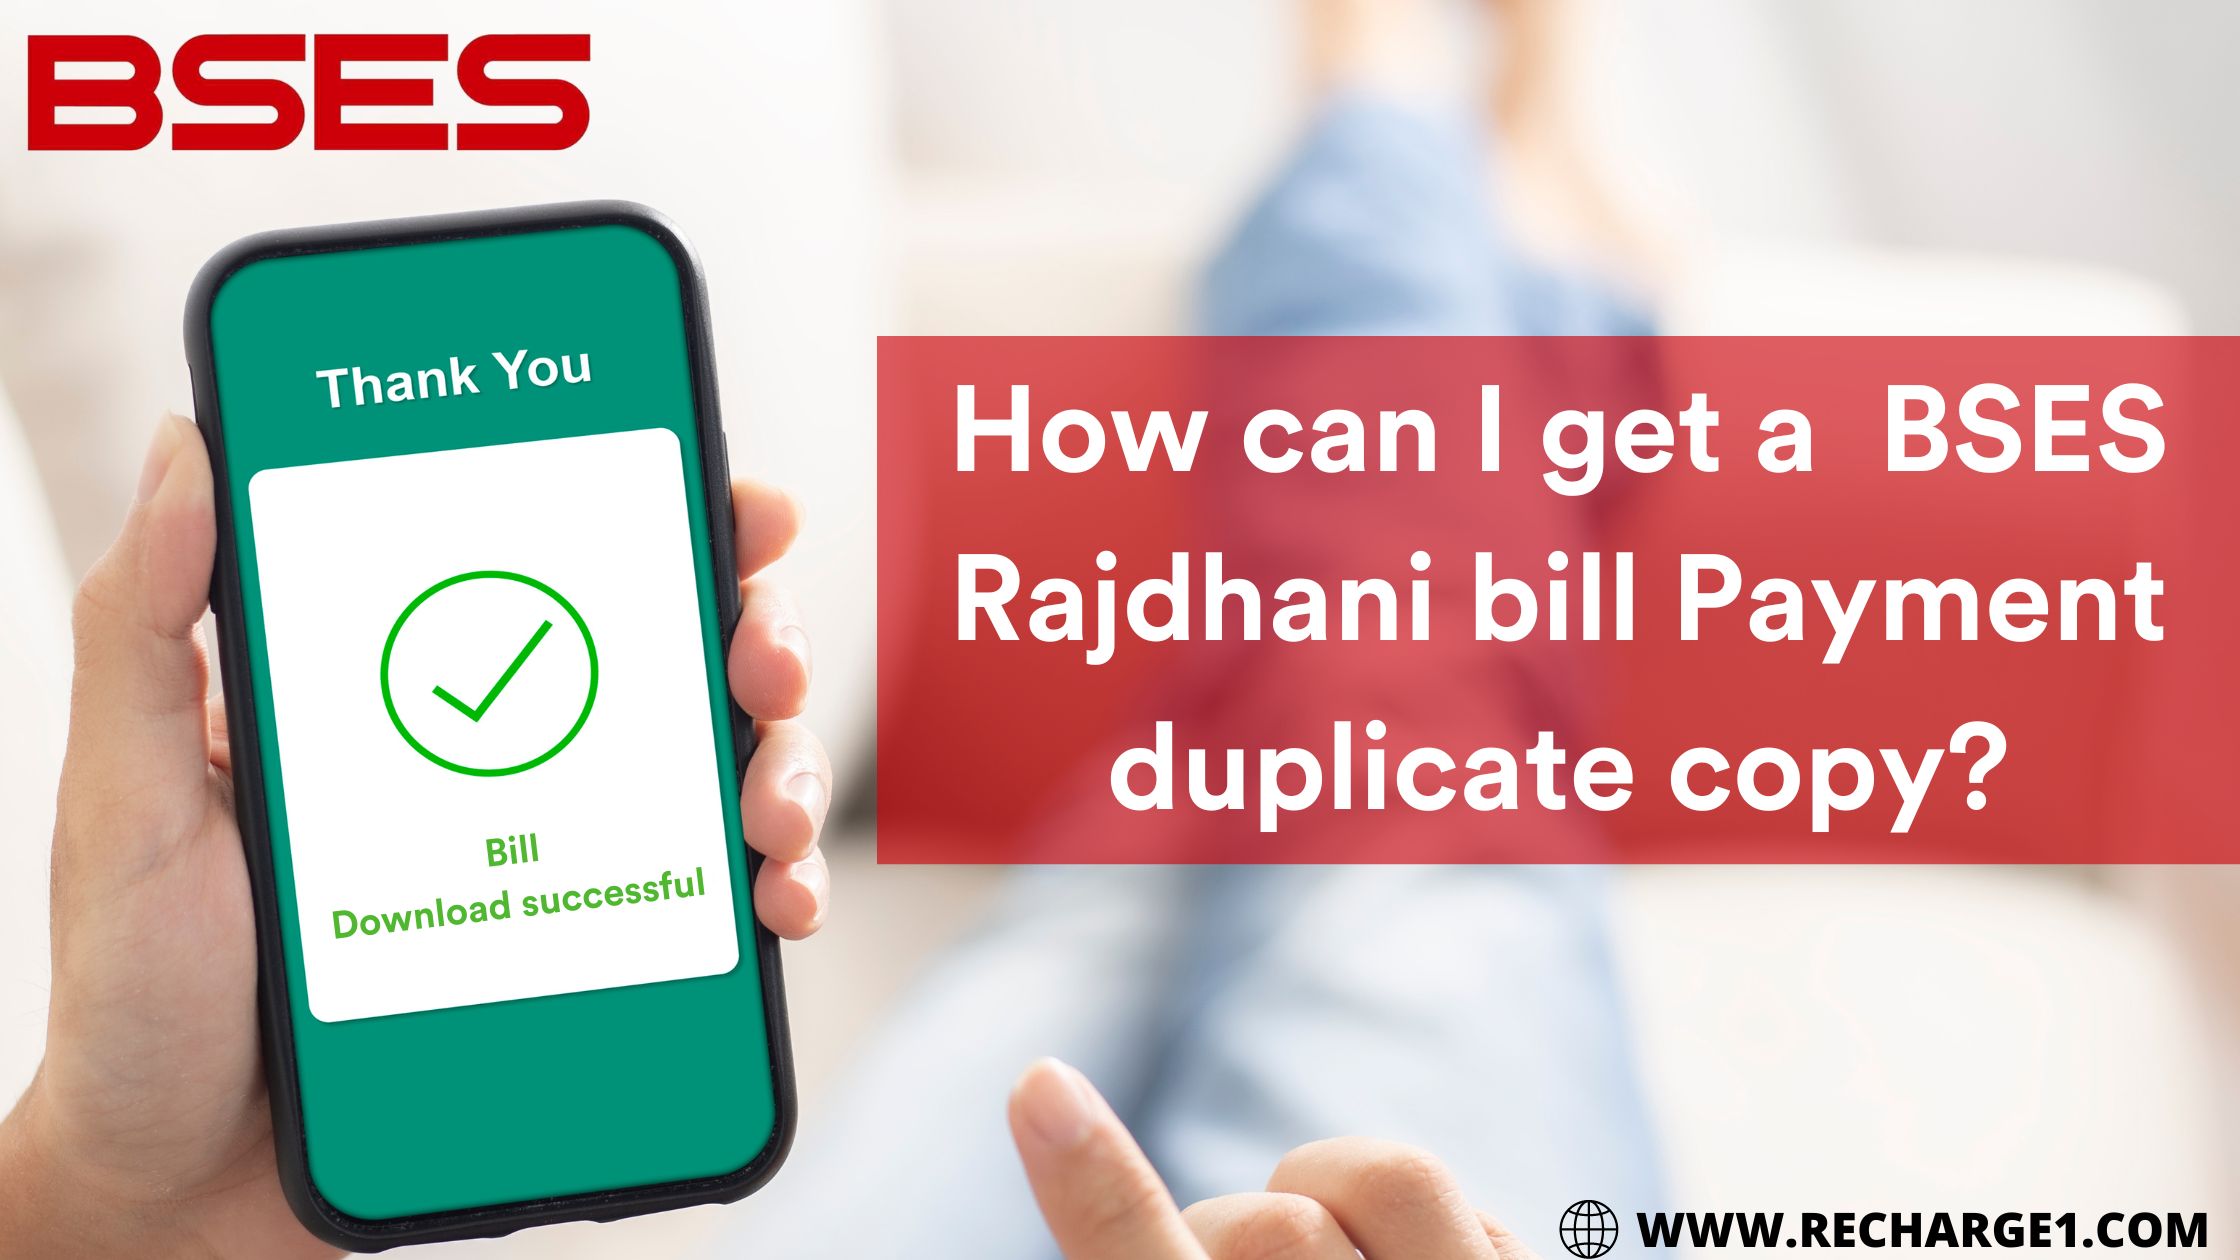  How can I get a  BSES Rajdhani bill Payment duplicate copy?